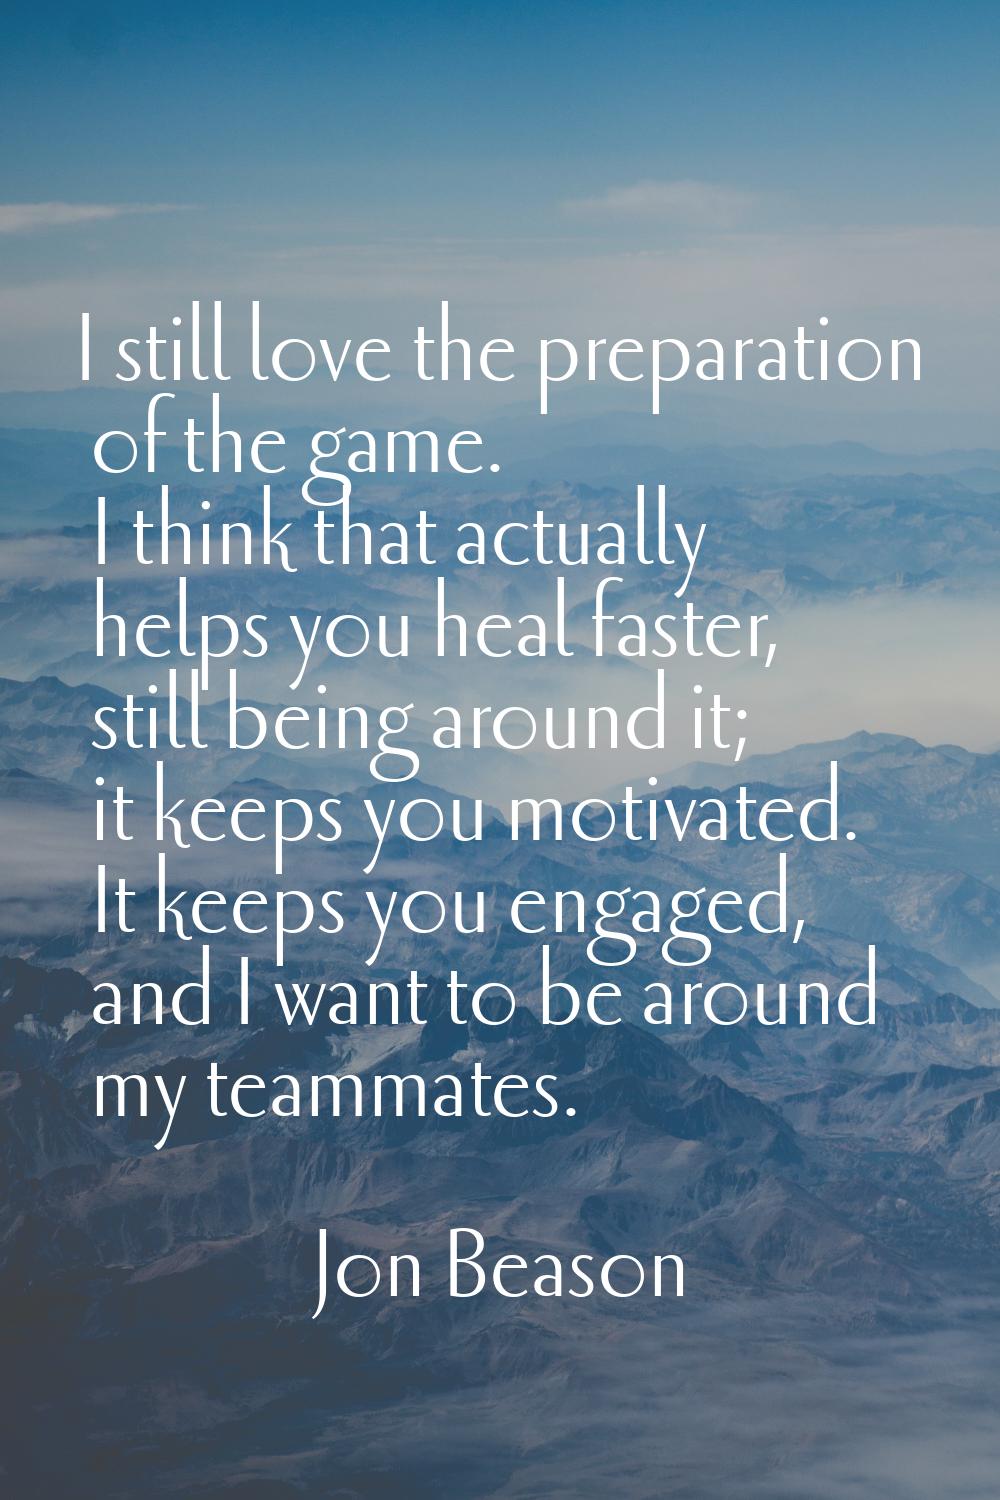 I still love the preparation of the game. I think that actually helps you heal faster, still being 